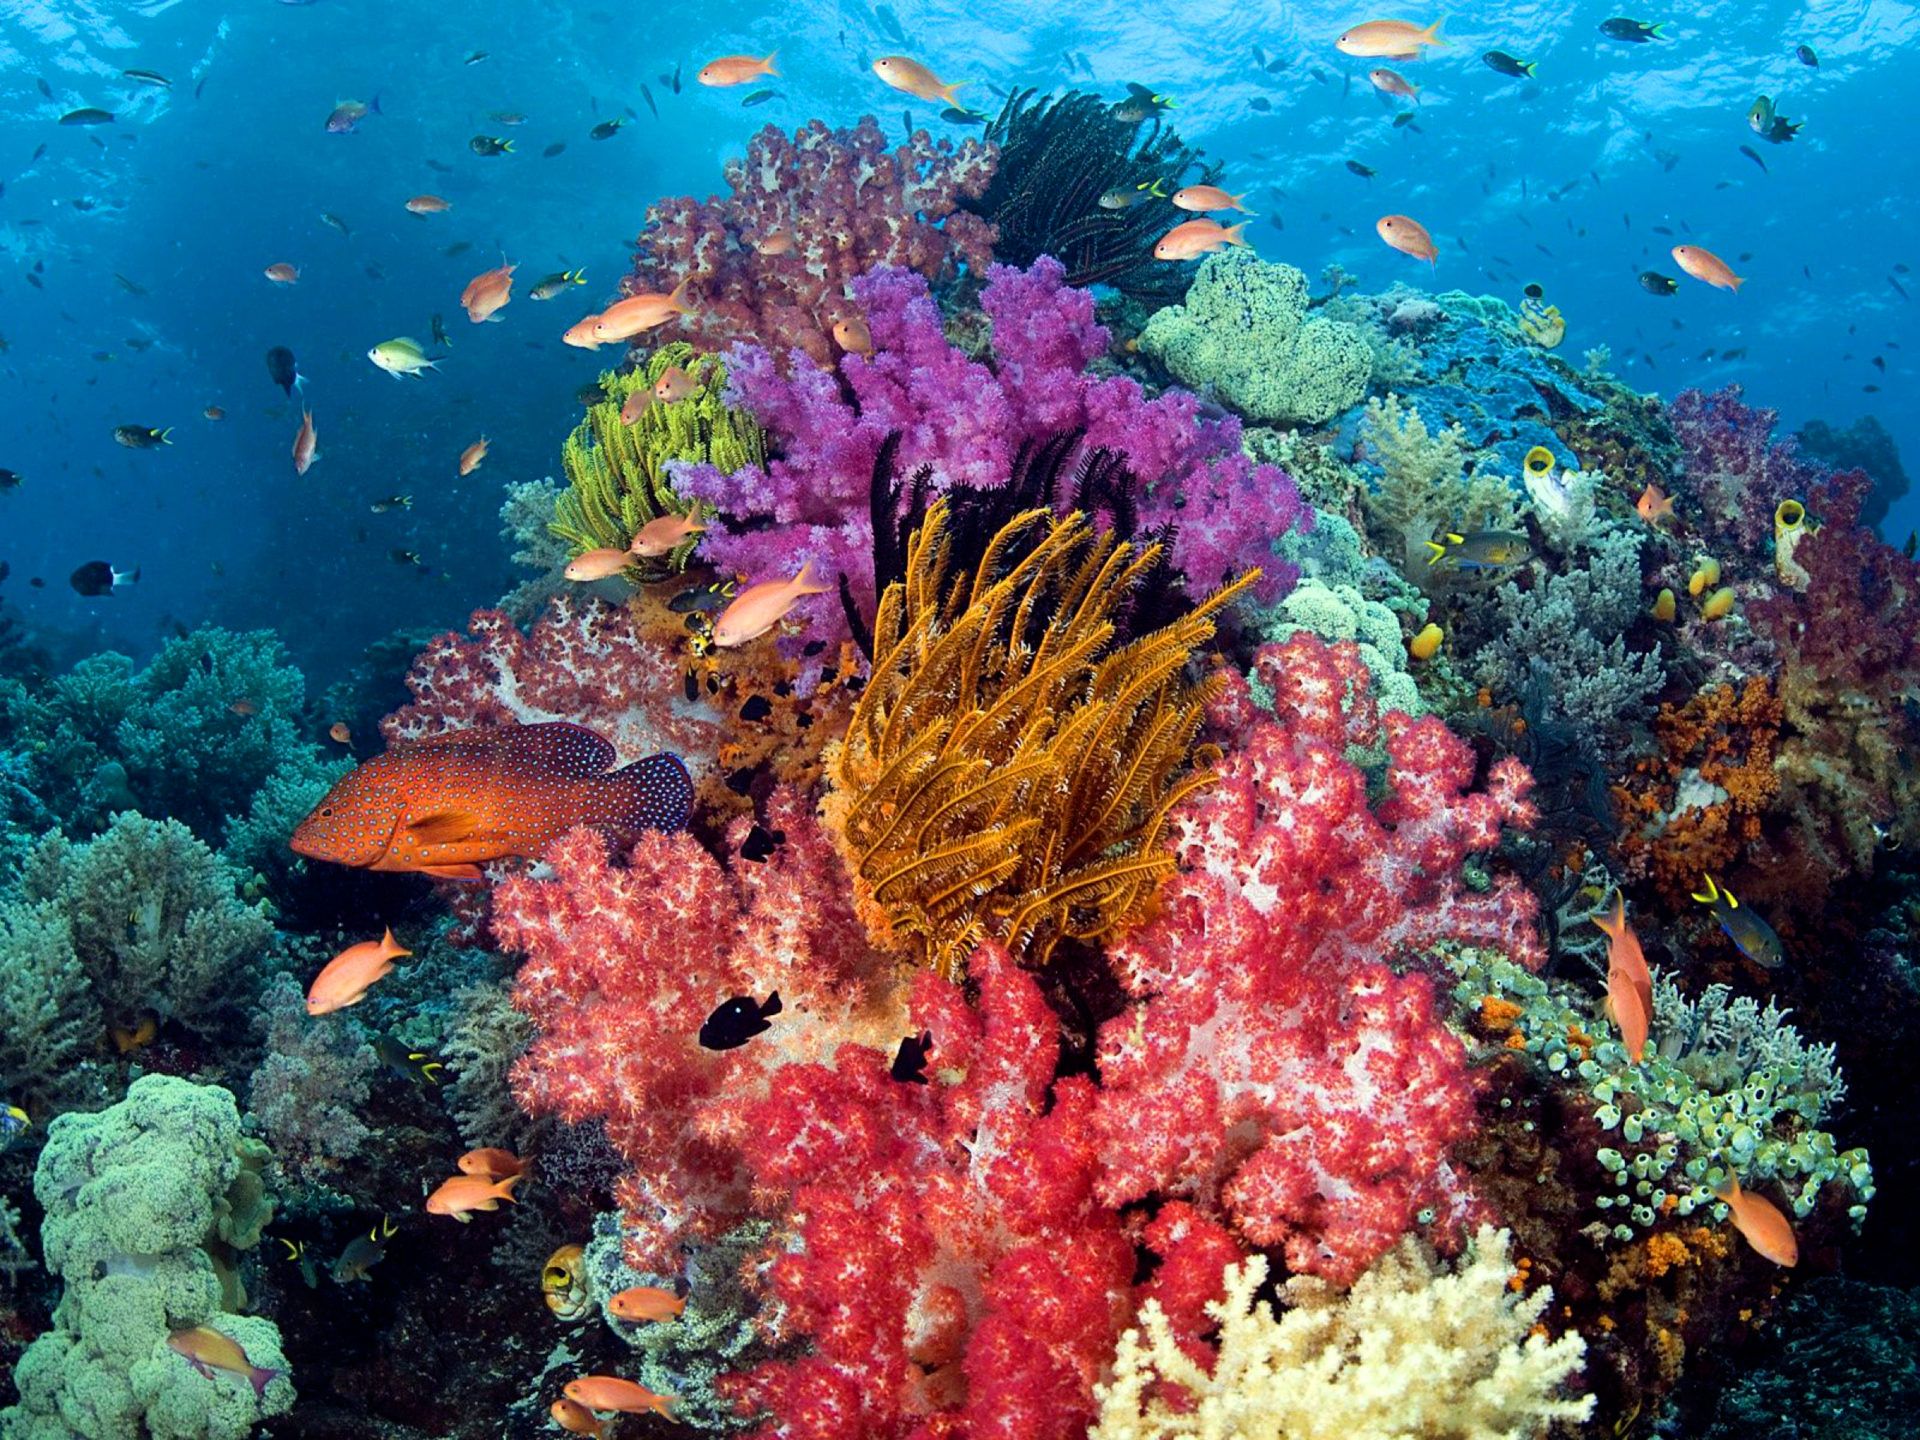 A colorful coral reef with fish swimming around it. - Coral